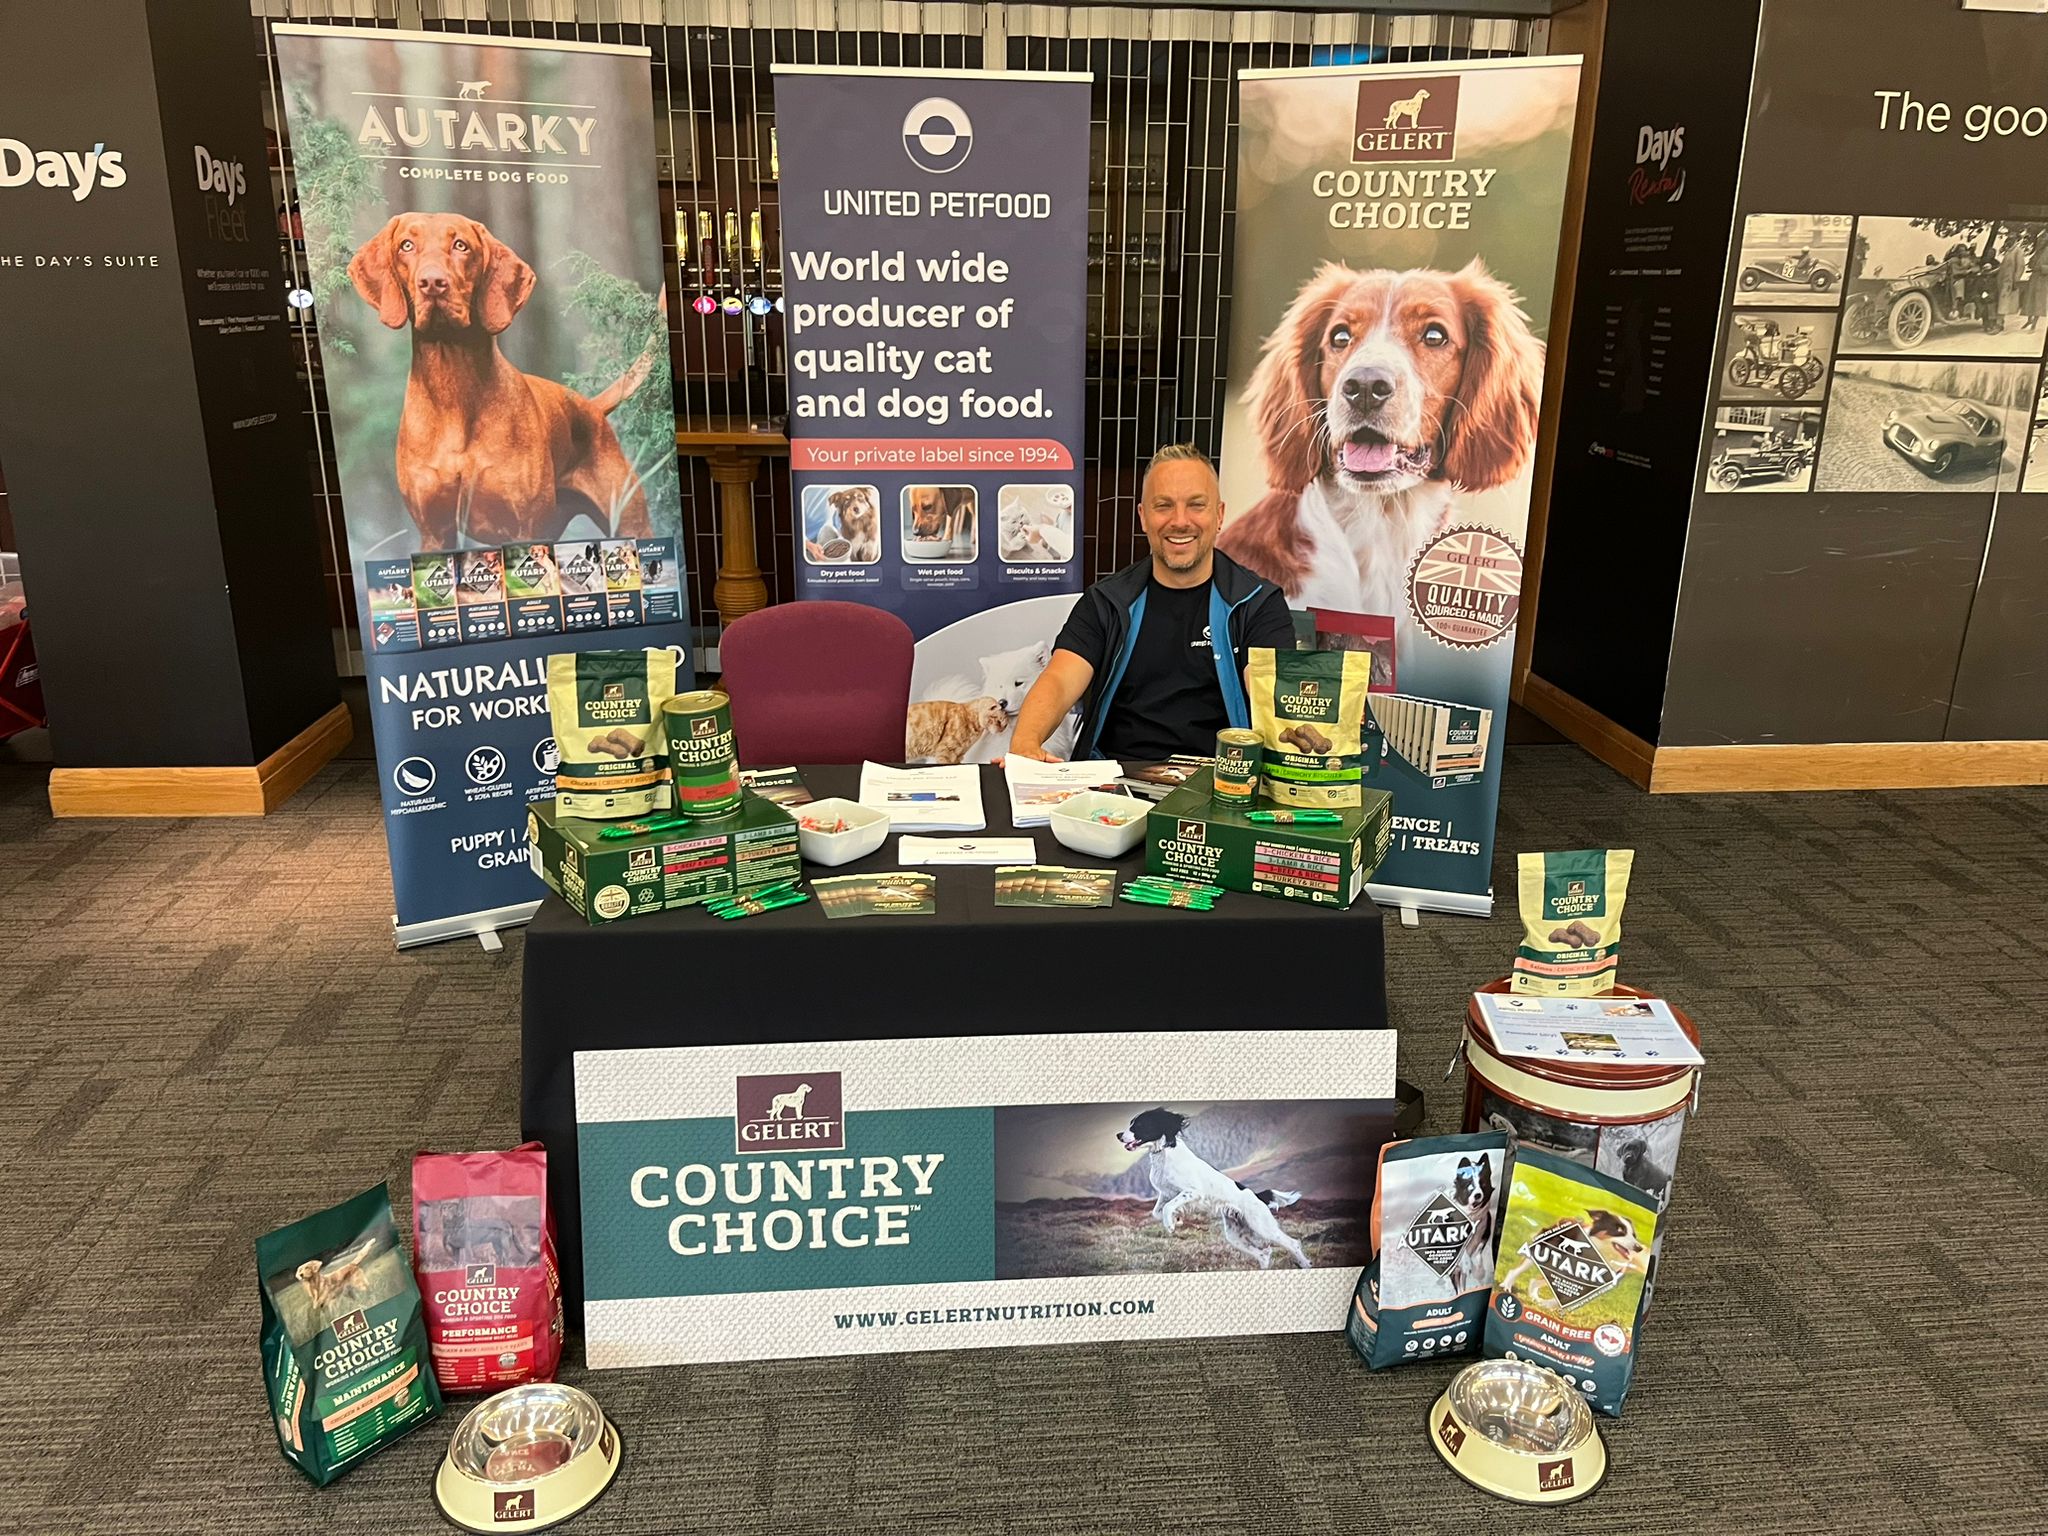 United Petfood at our event in Swansea